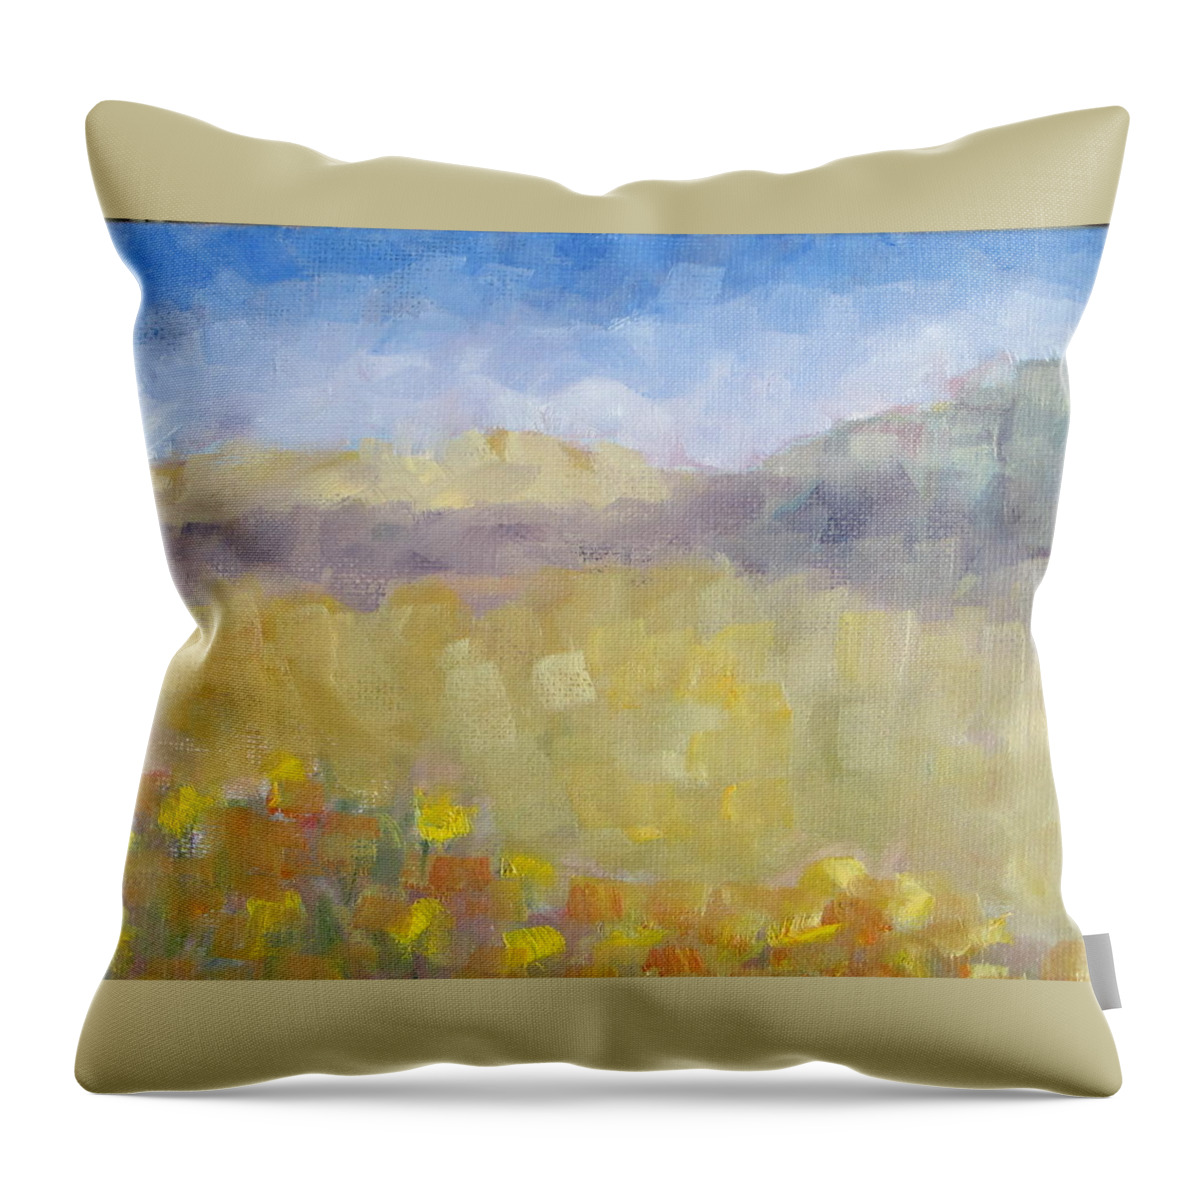 Landscape Throw Pillow featuring the painting Golden Meadow by Patricia Cleasby